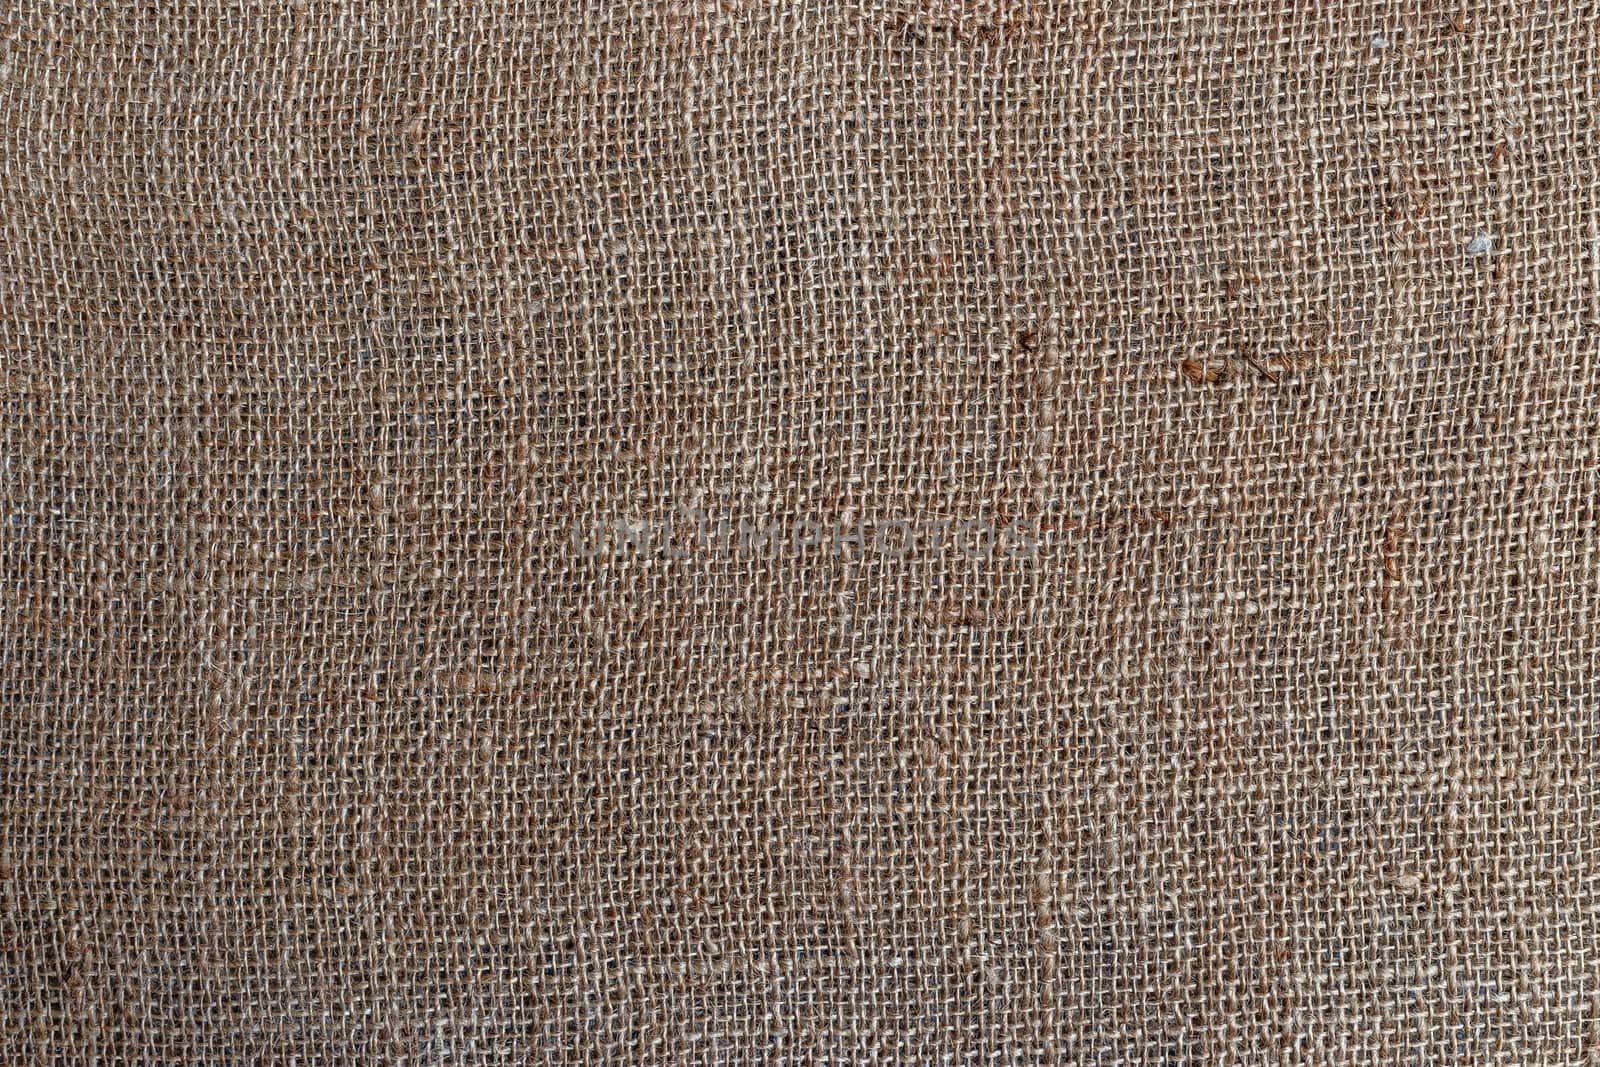 Burlap Background Texture by ires007